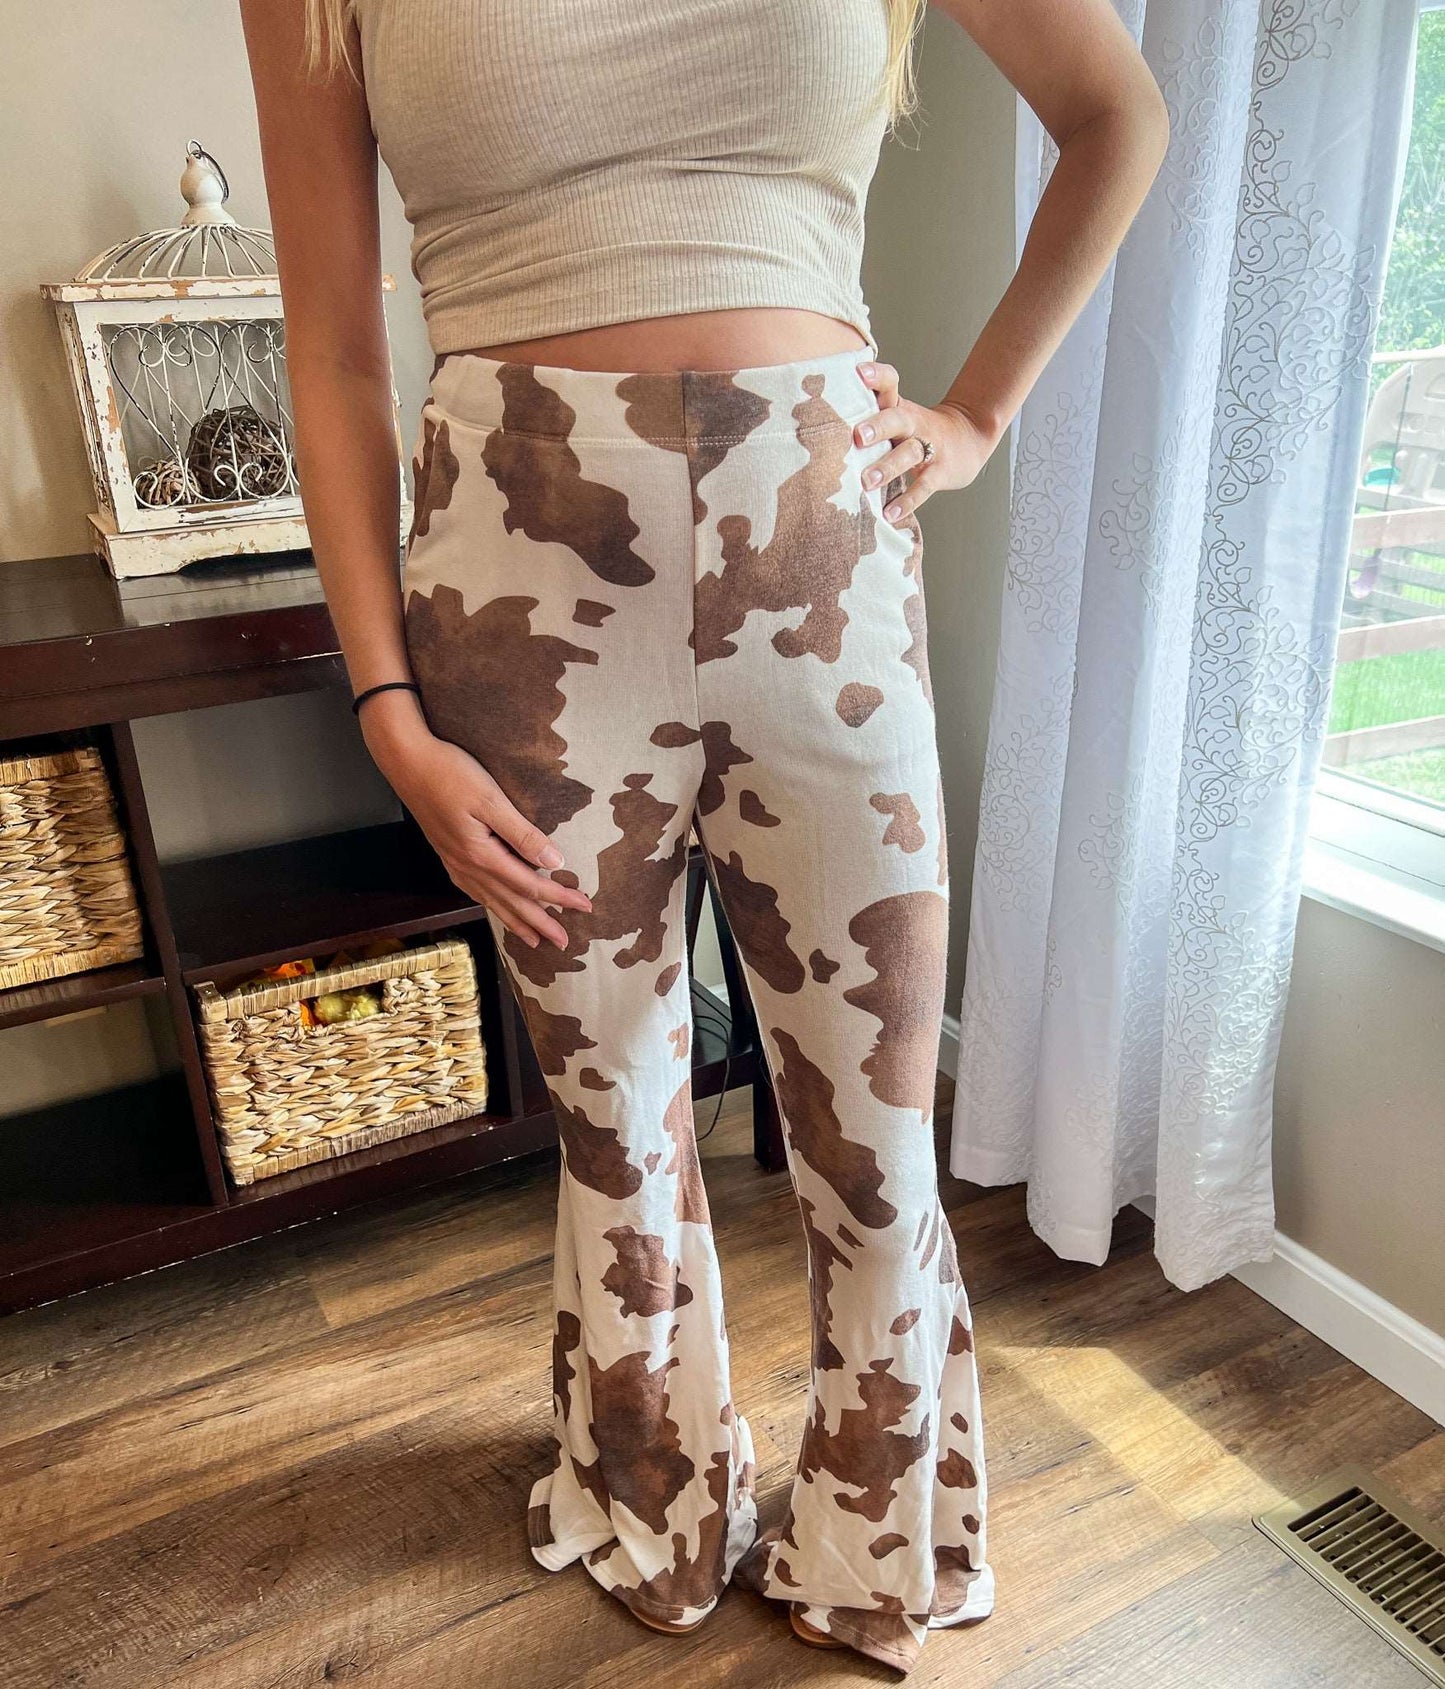 Jade by Jane High rise mocha cow print flare pants. Model wearing cow print flare pants and an oatmeal colored crop top for a trendy and casual outfit. Mocha Cow print pants available at Lexington and Gray sizes Small through 3x